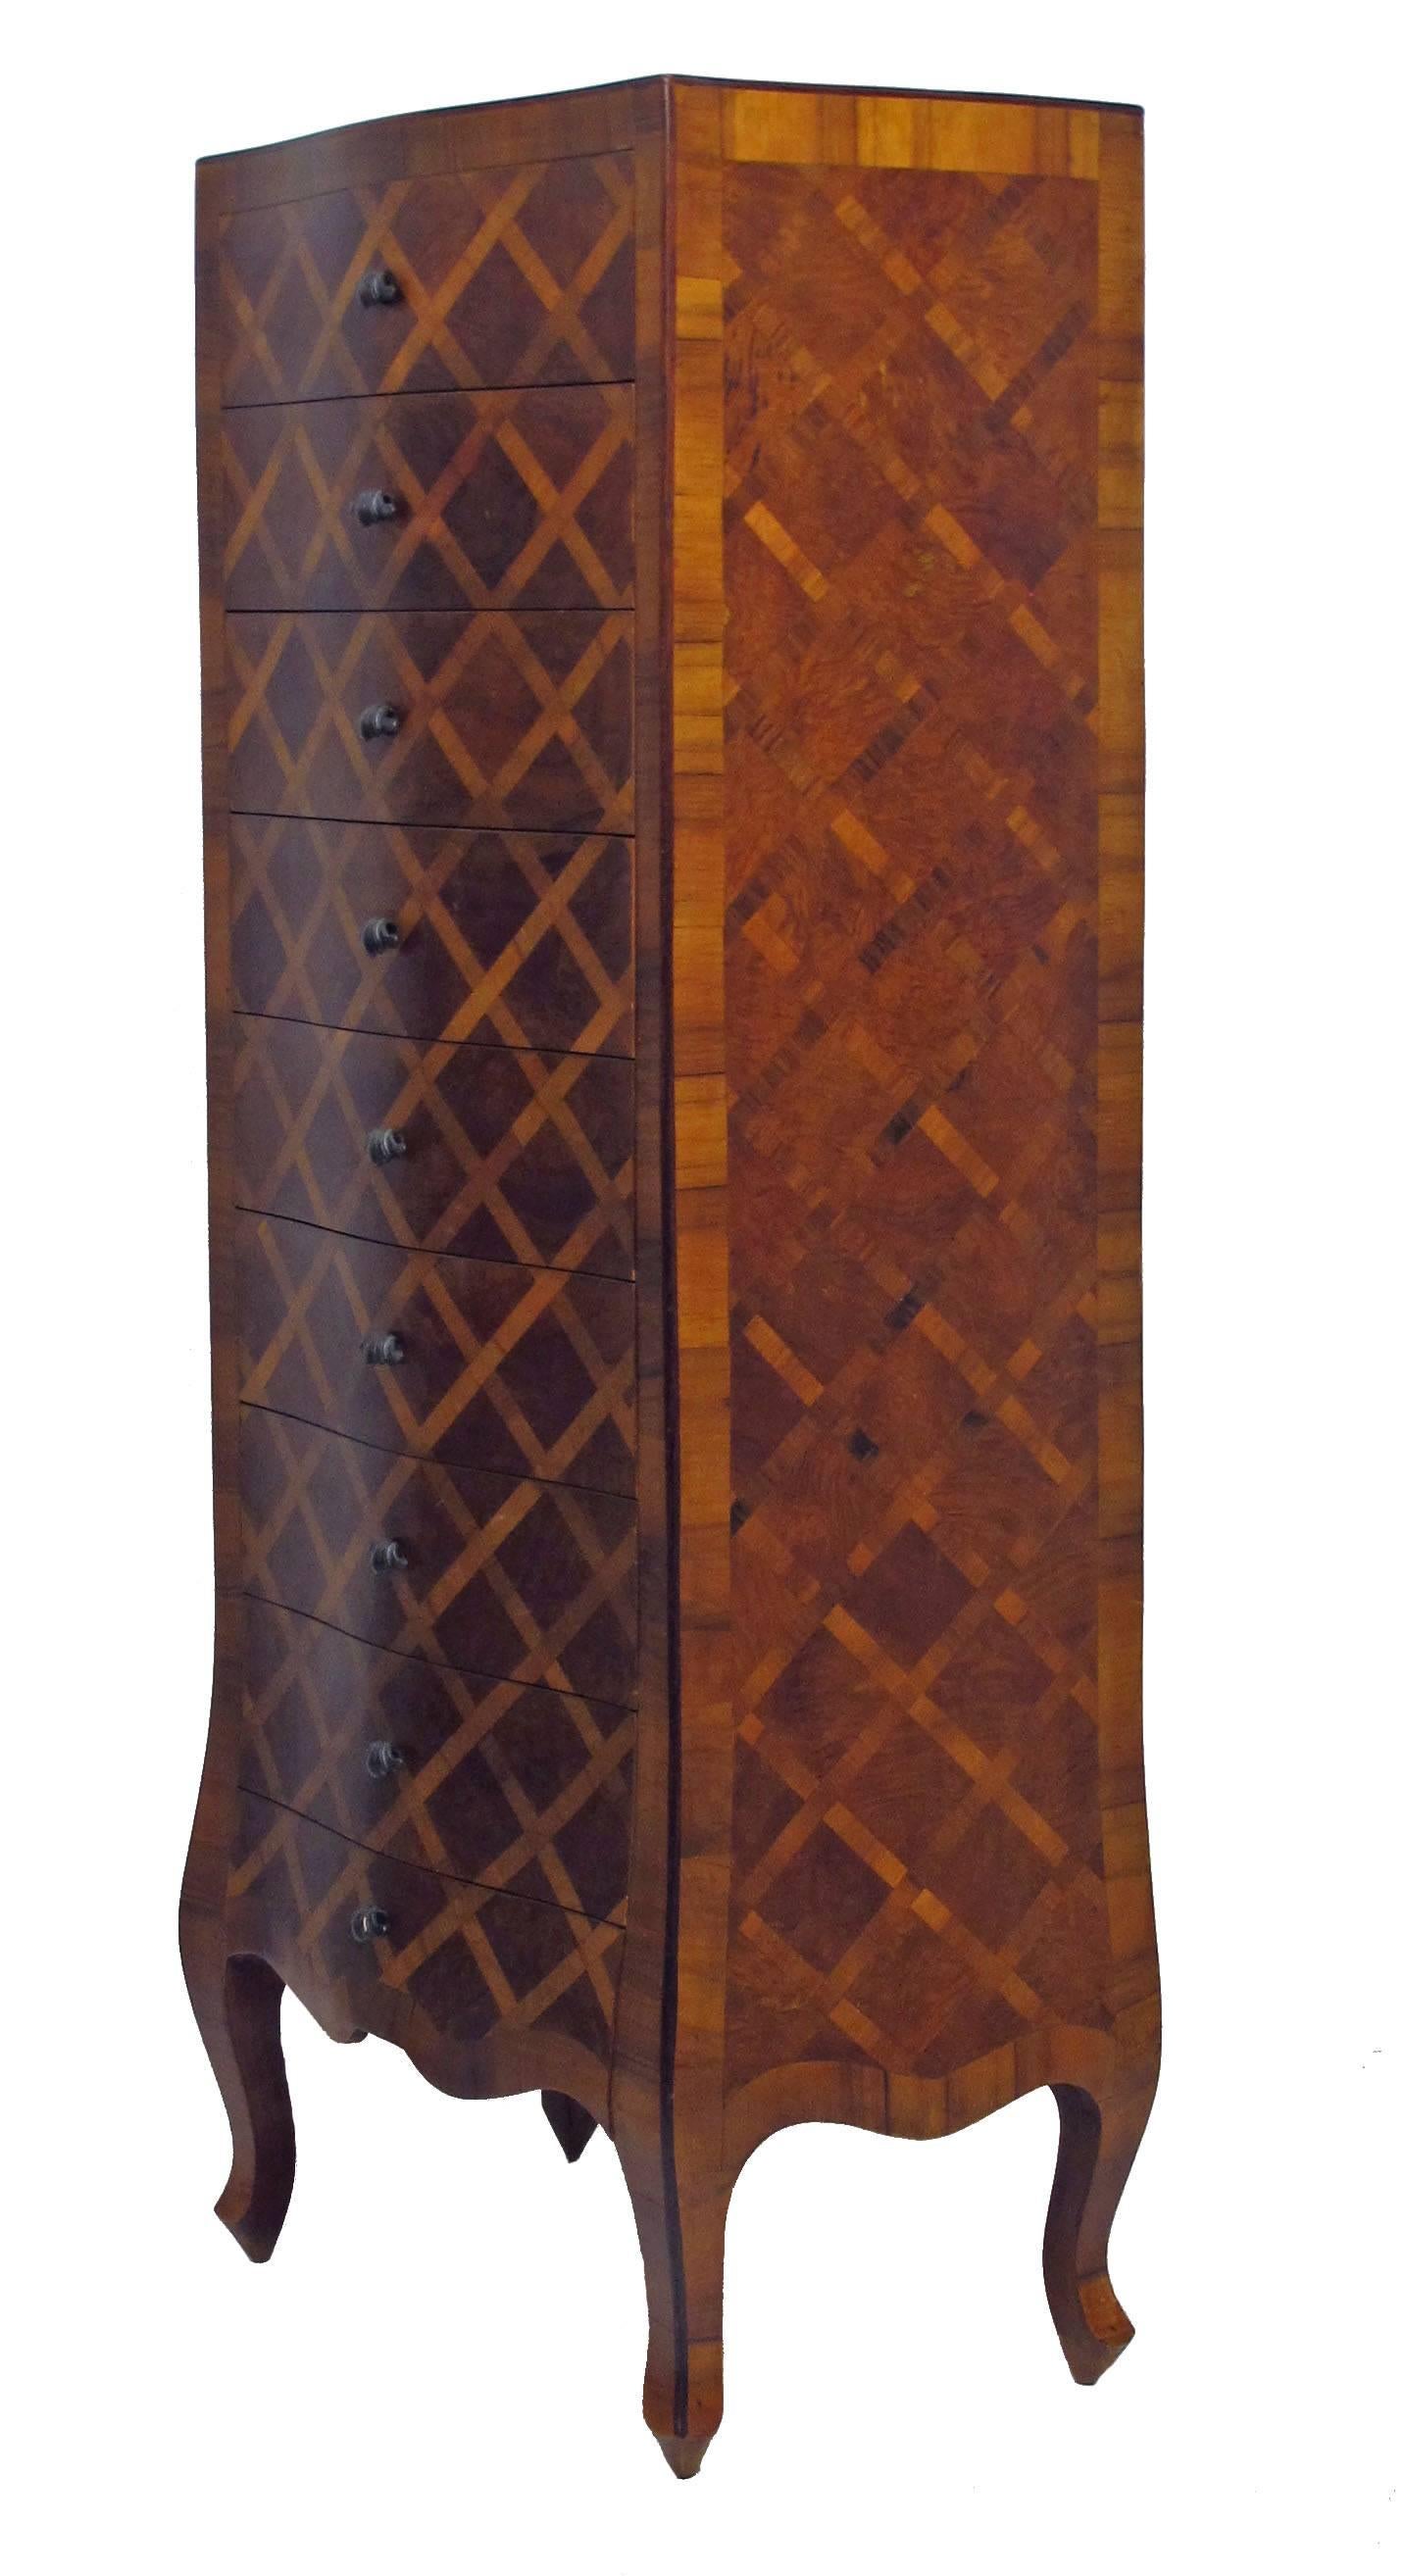 Walnut and Burl Walnut chest of drawers with inlaid parquetry design, having scroll handles and standing on cabriole legs, Italy, mid 20th century.